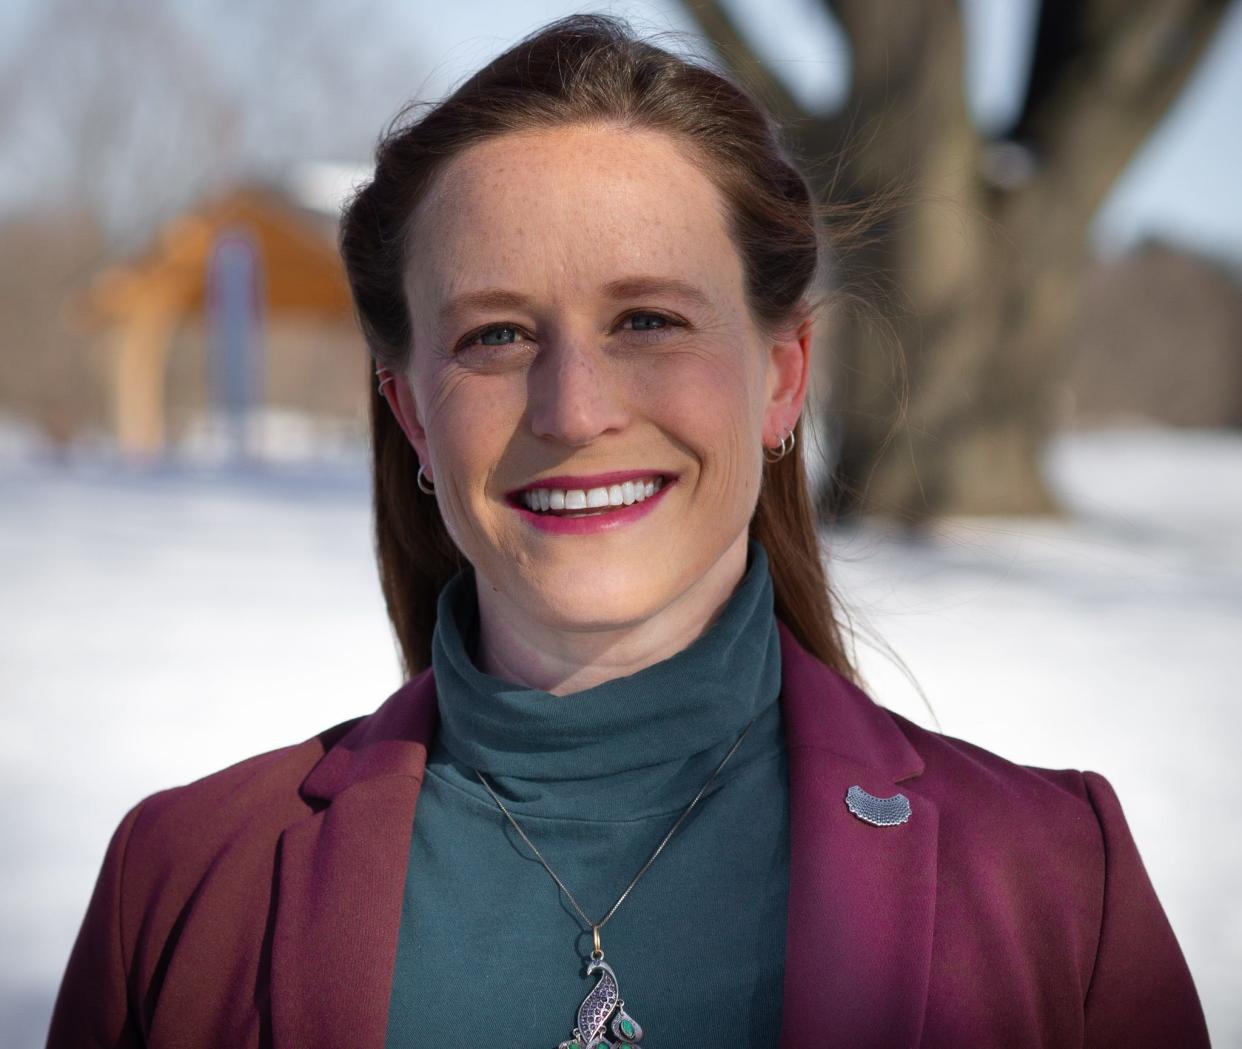 Elinor Levin is running unopposed to retain her seat for the next two years representing portions of south and west Iowa City in Iowa House District 89. Levin works as a writing tutor and graduated from Cornell College.